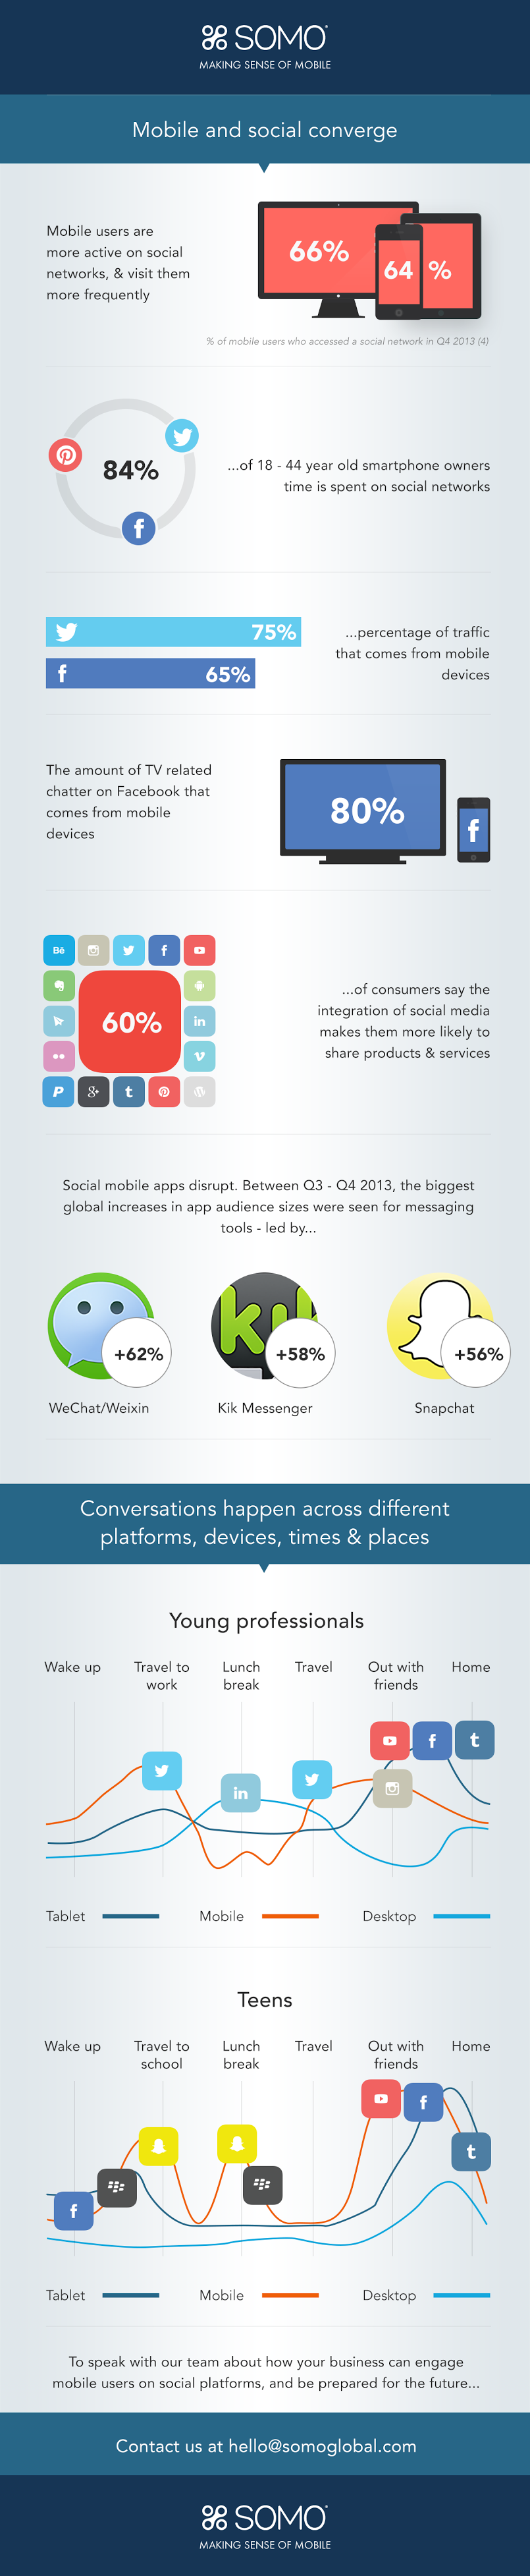 what happens when #socialmedia and mobile converge? - #infographic #SOMO